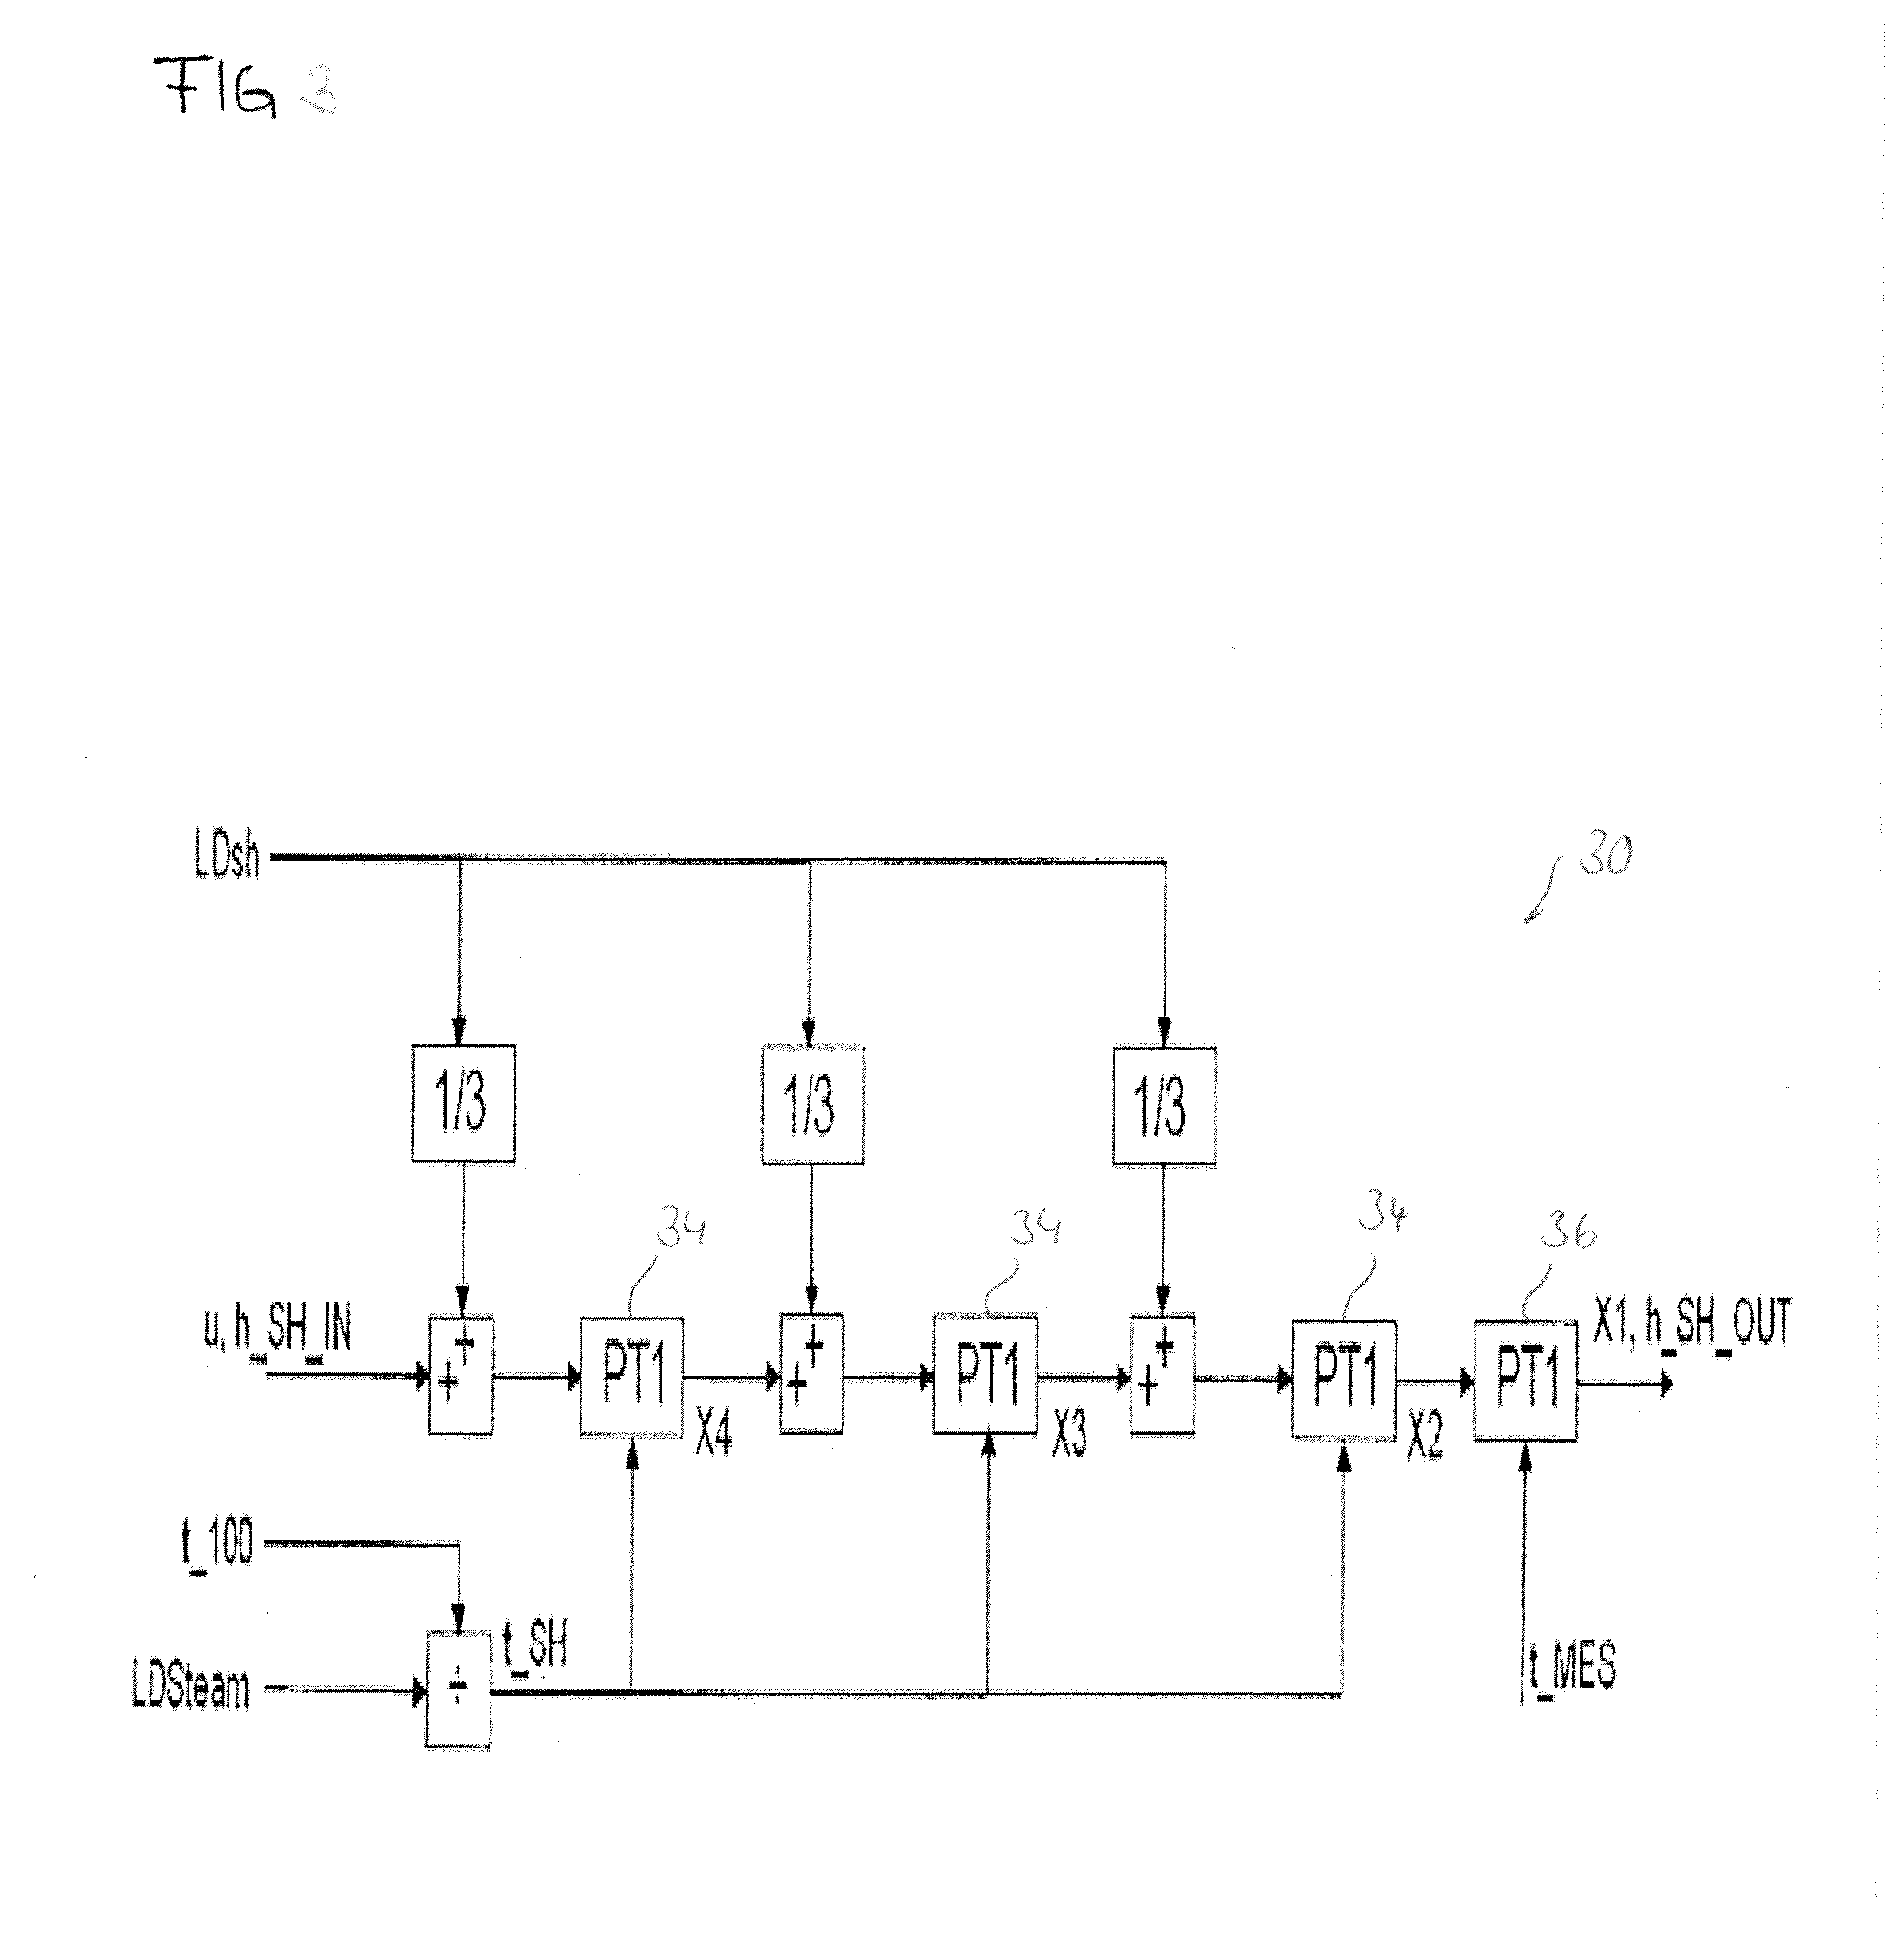 Method and device for controlling a temperature of steam for a steam power plant